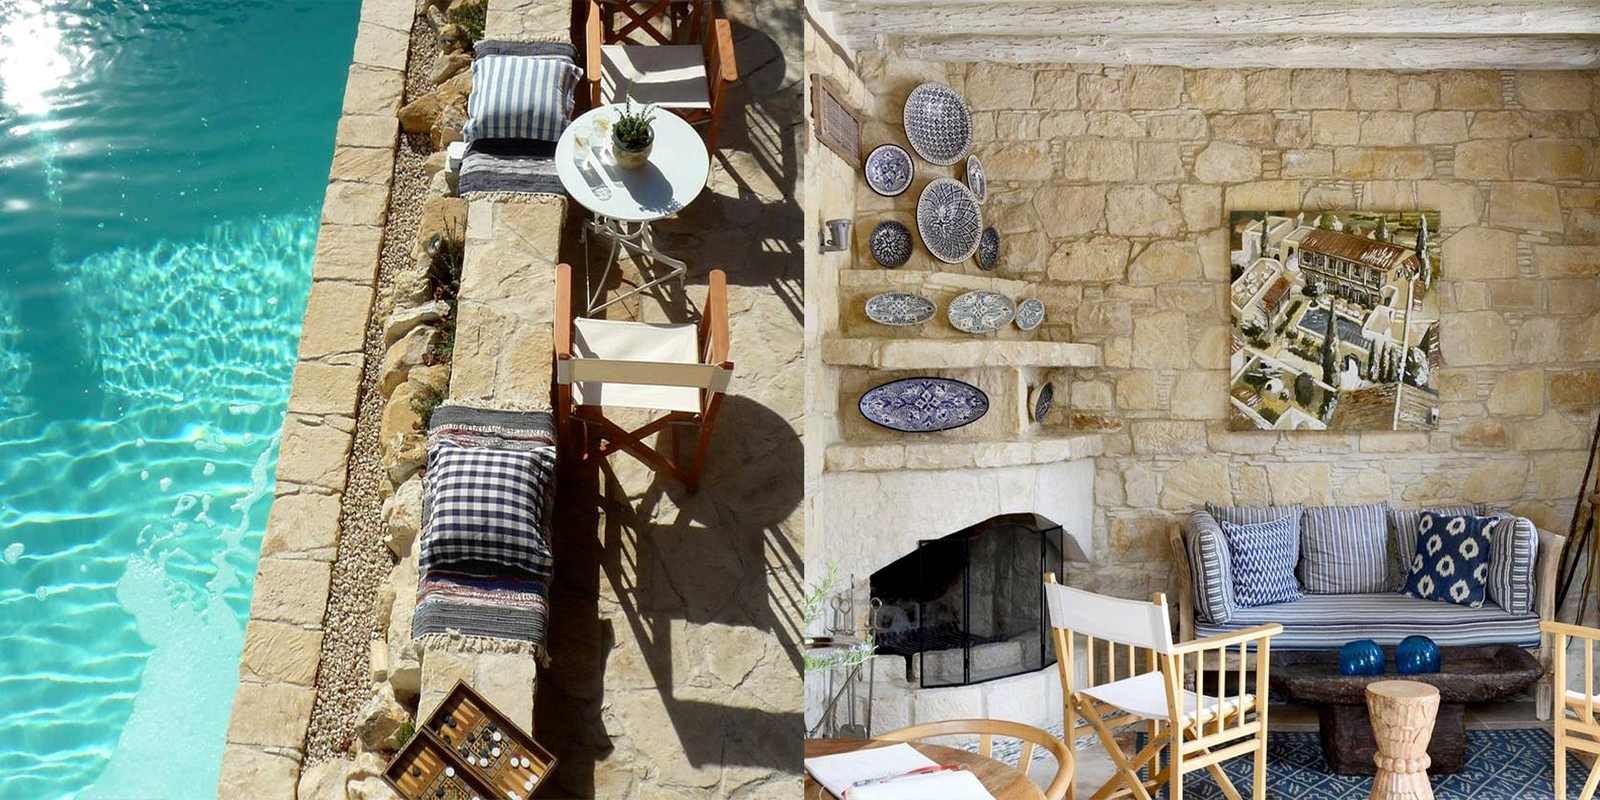 Beach <br />Villa Pantheon accommodation in pafos”></p>
<h3><b>Apokryfo Traditional Guesthouse</b></p>
<p><a class=